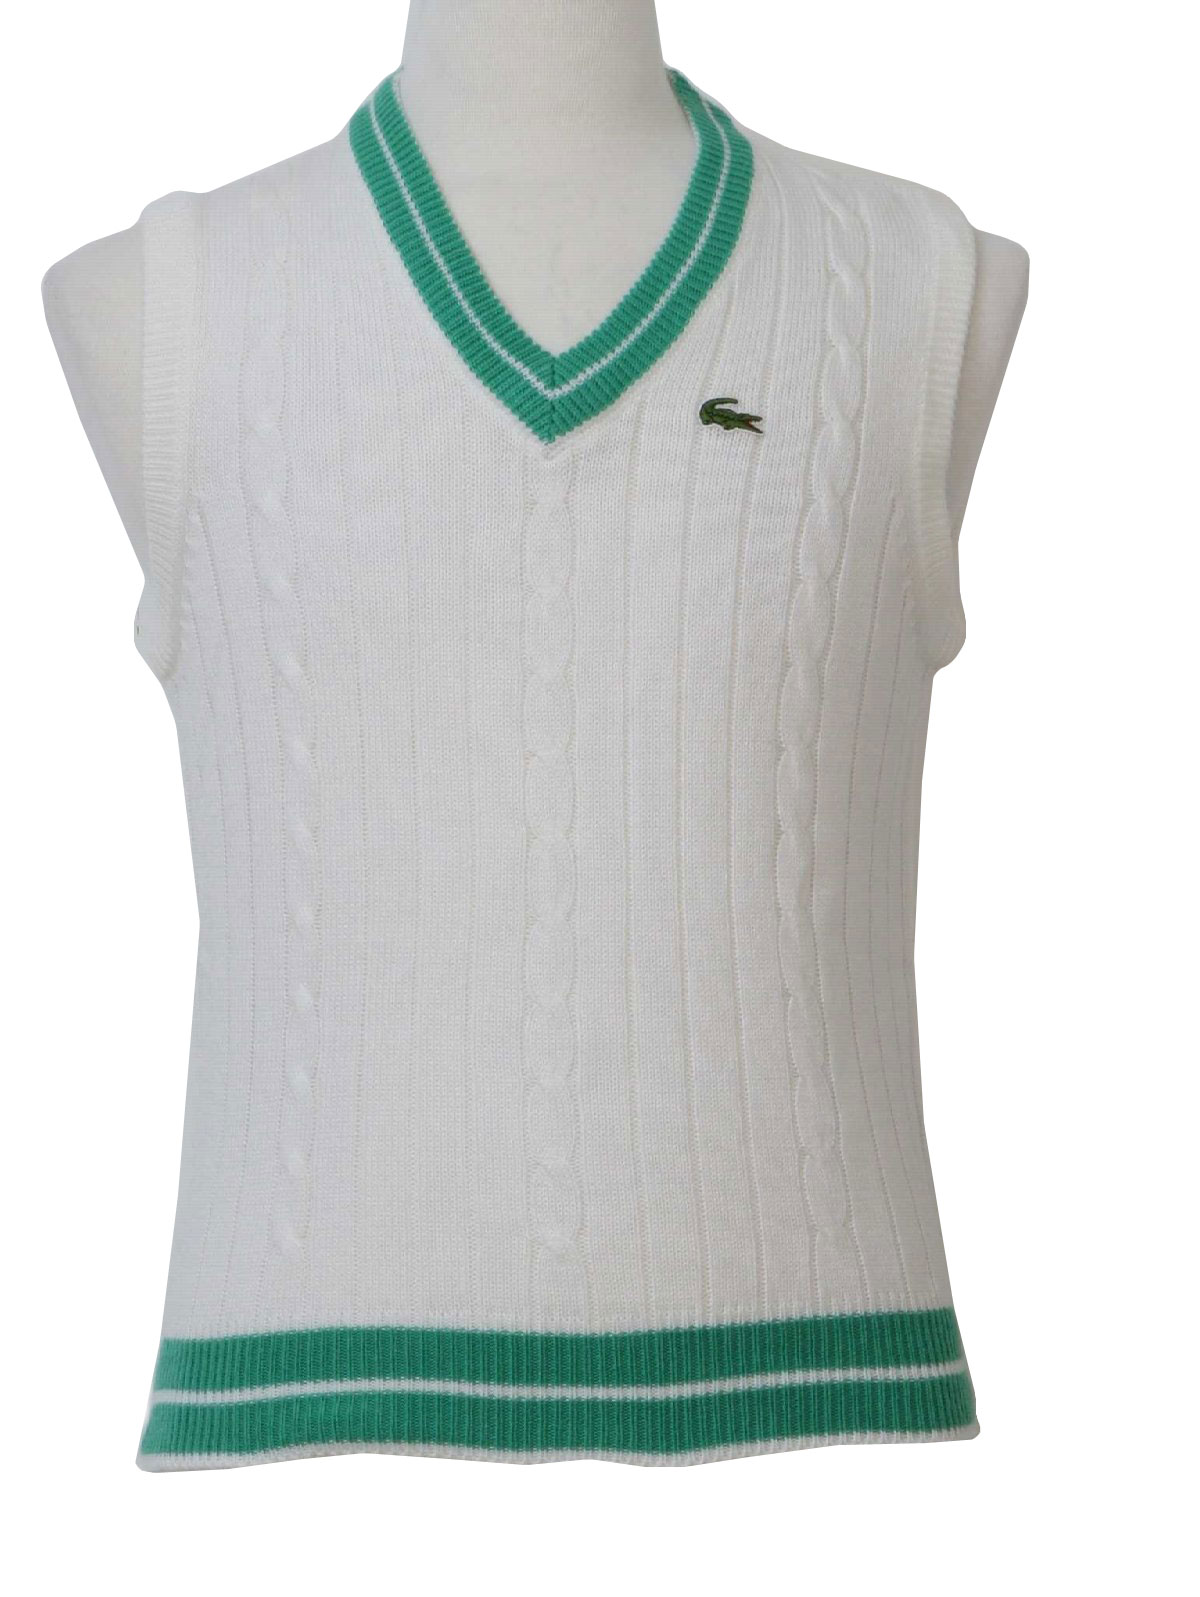 Eighties Vintage Sweater: 80s -Izod Lacoste- Mens white acrylic rib and  cable knit with mint green and white striped rib kit neck and waistband,  back is plain knit, totally 80s preppy V-neck